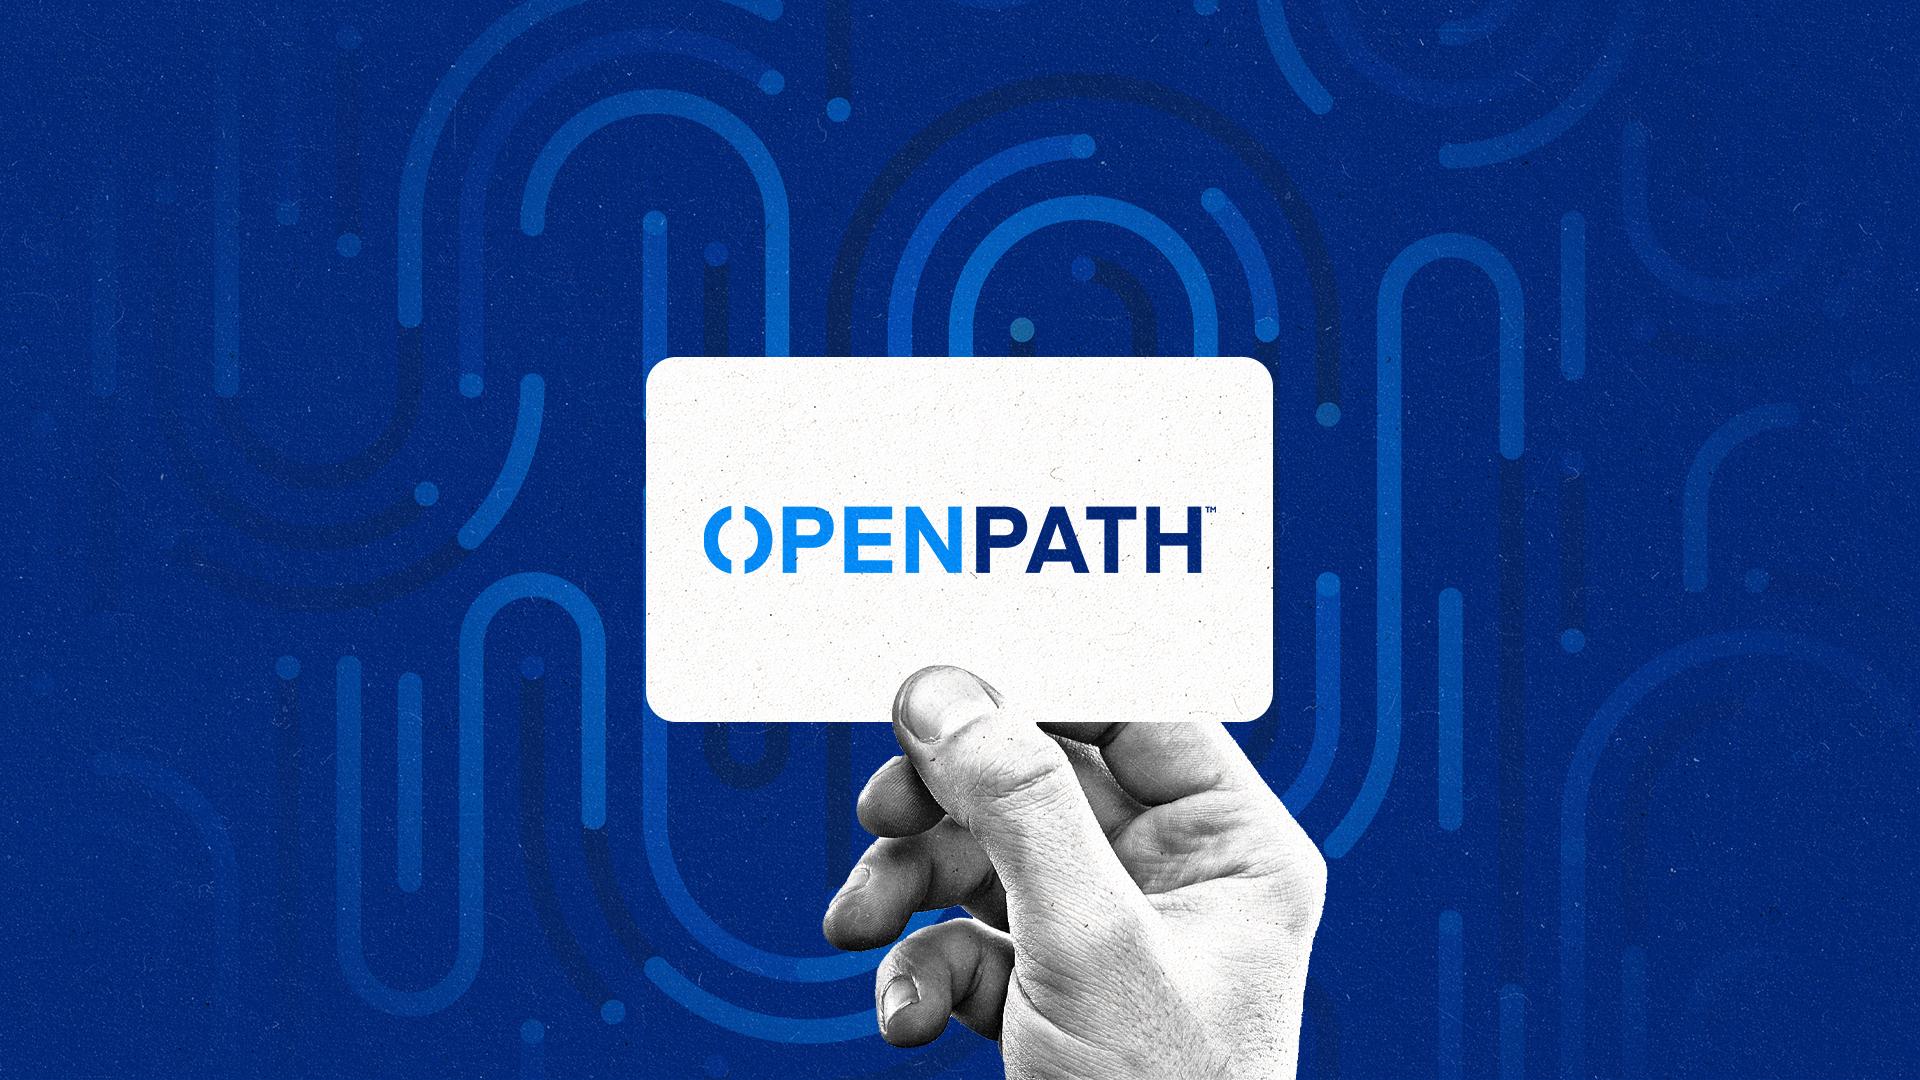 The Trade Desk closes the gap between advertisers and publishers with debut of OpenPath